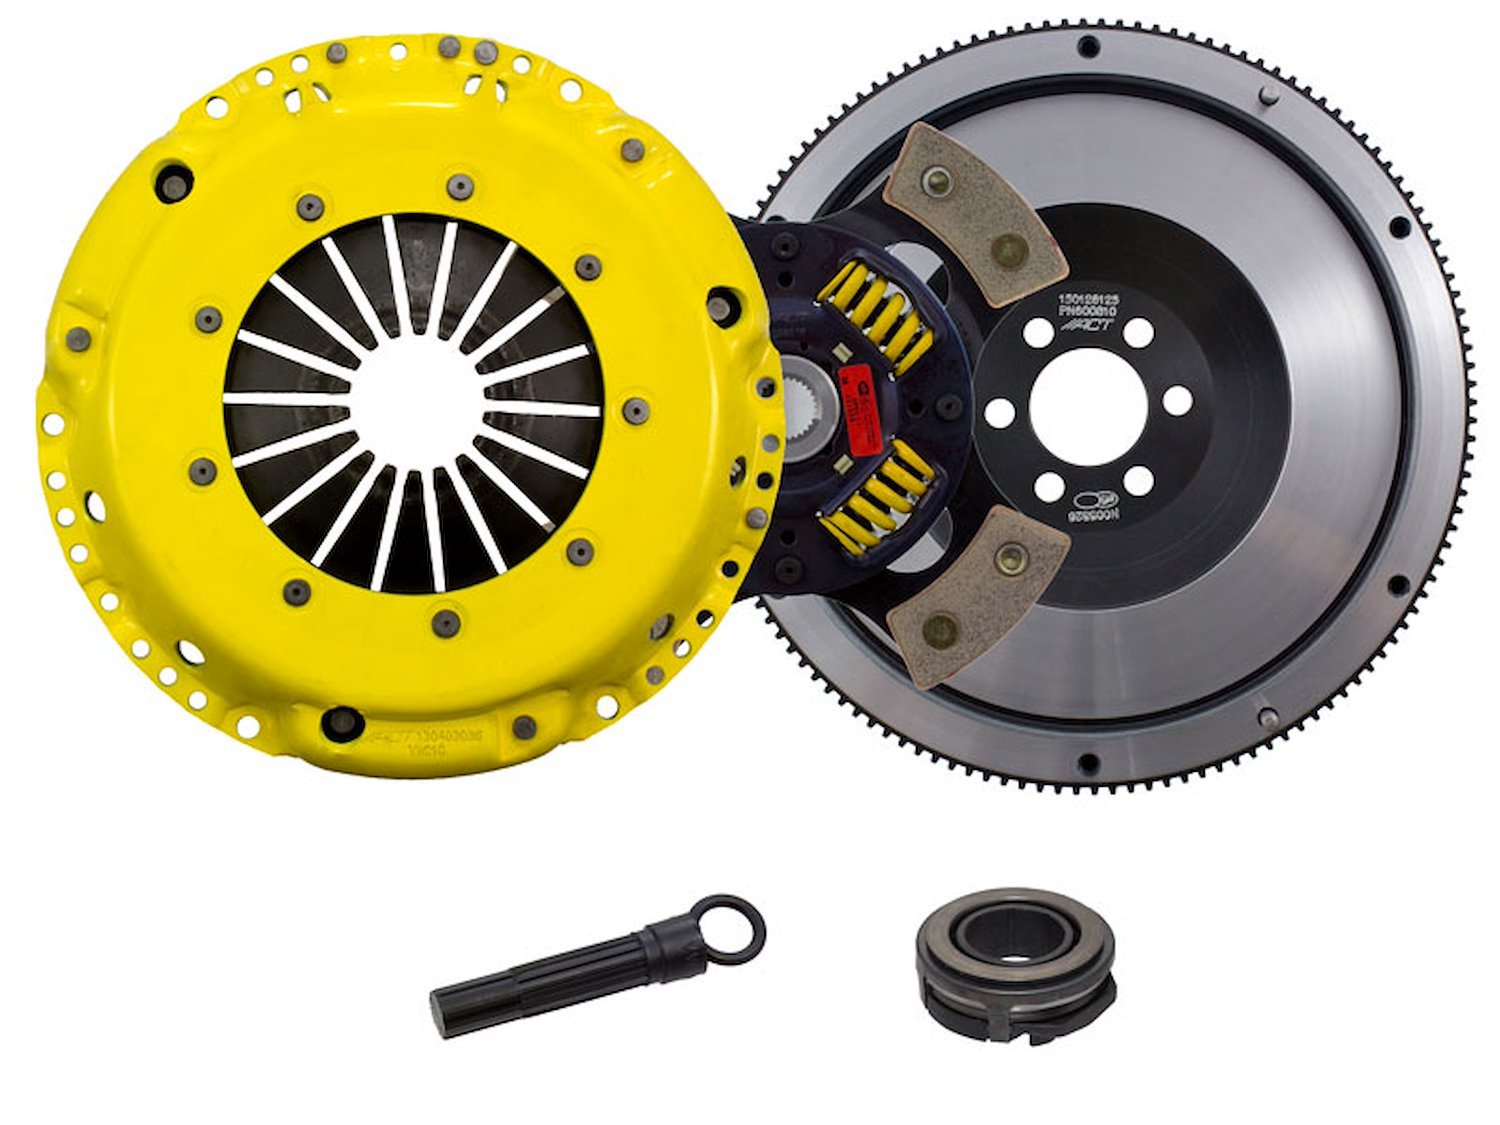 HD/Race Sprung 4-Pad Transmission Clutch Kit Fits Select Audi/Volkswagen